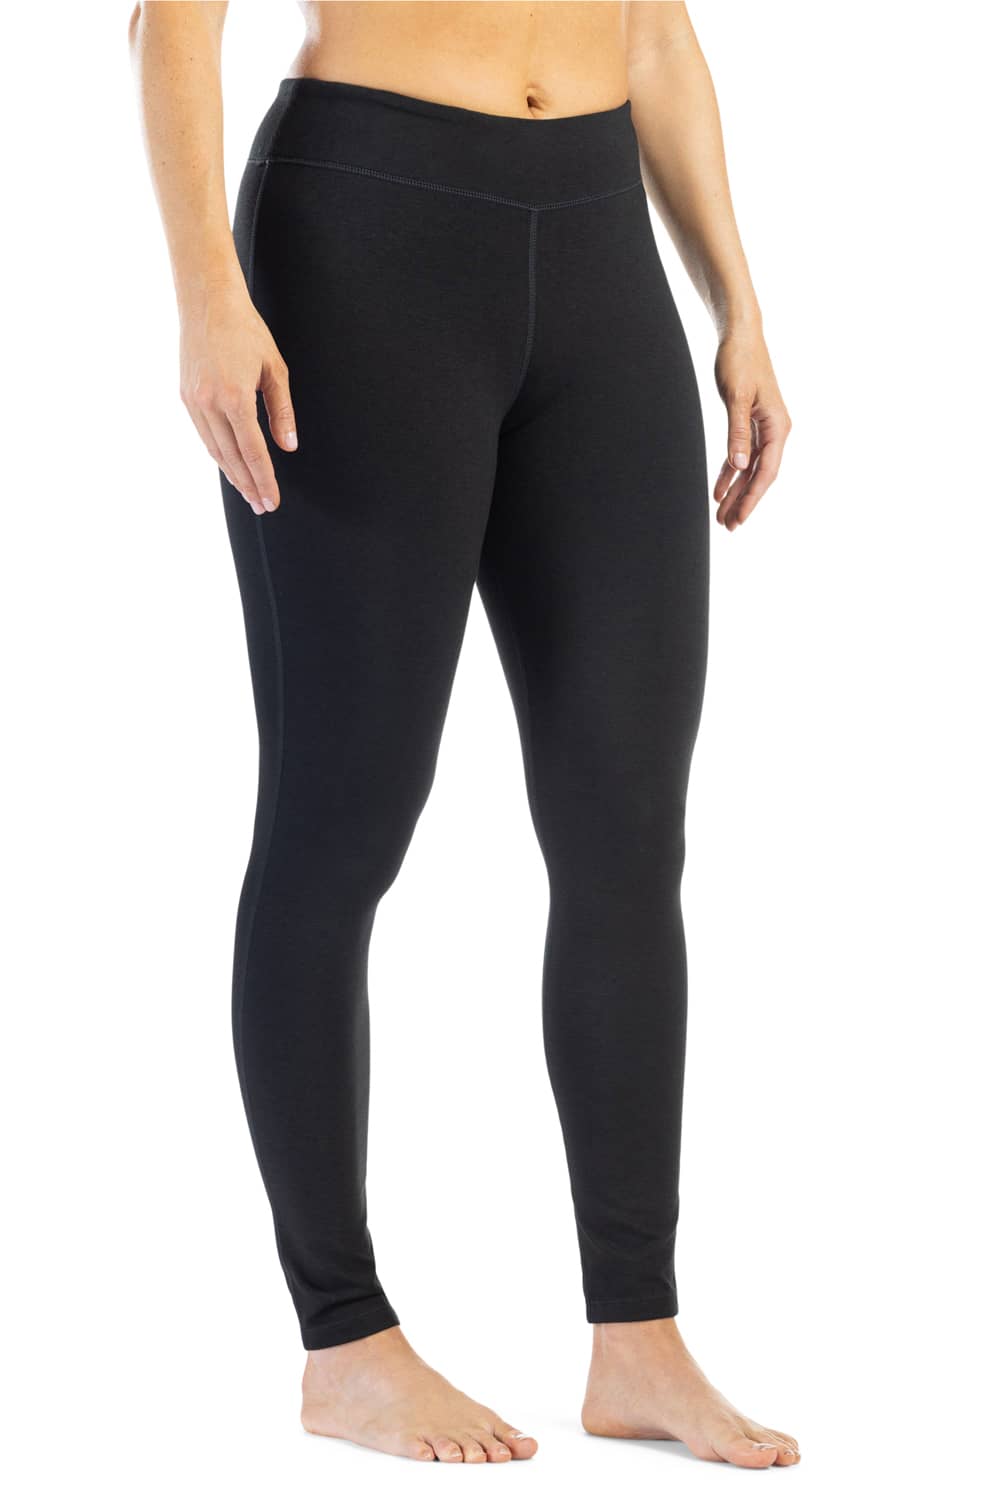 Womens Active Workout Full Length Cotton Leggings with Pockets (S-XL) -  KOGMO